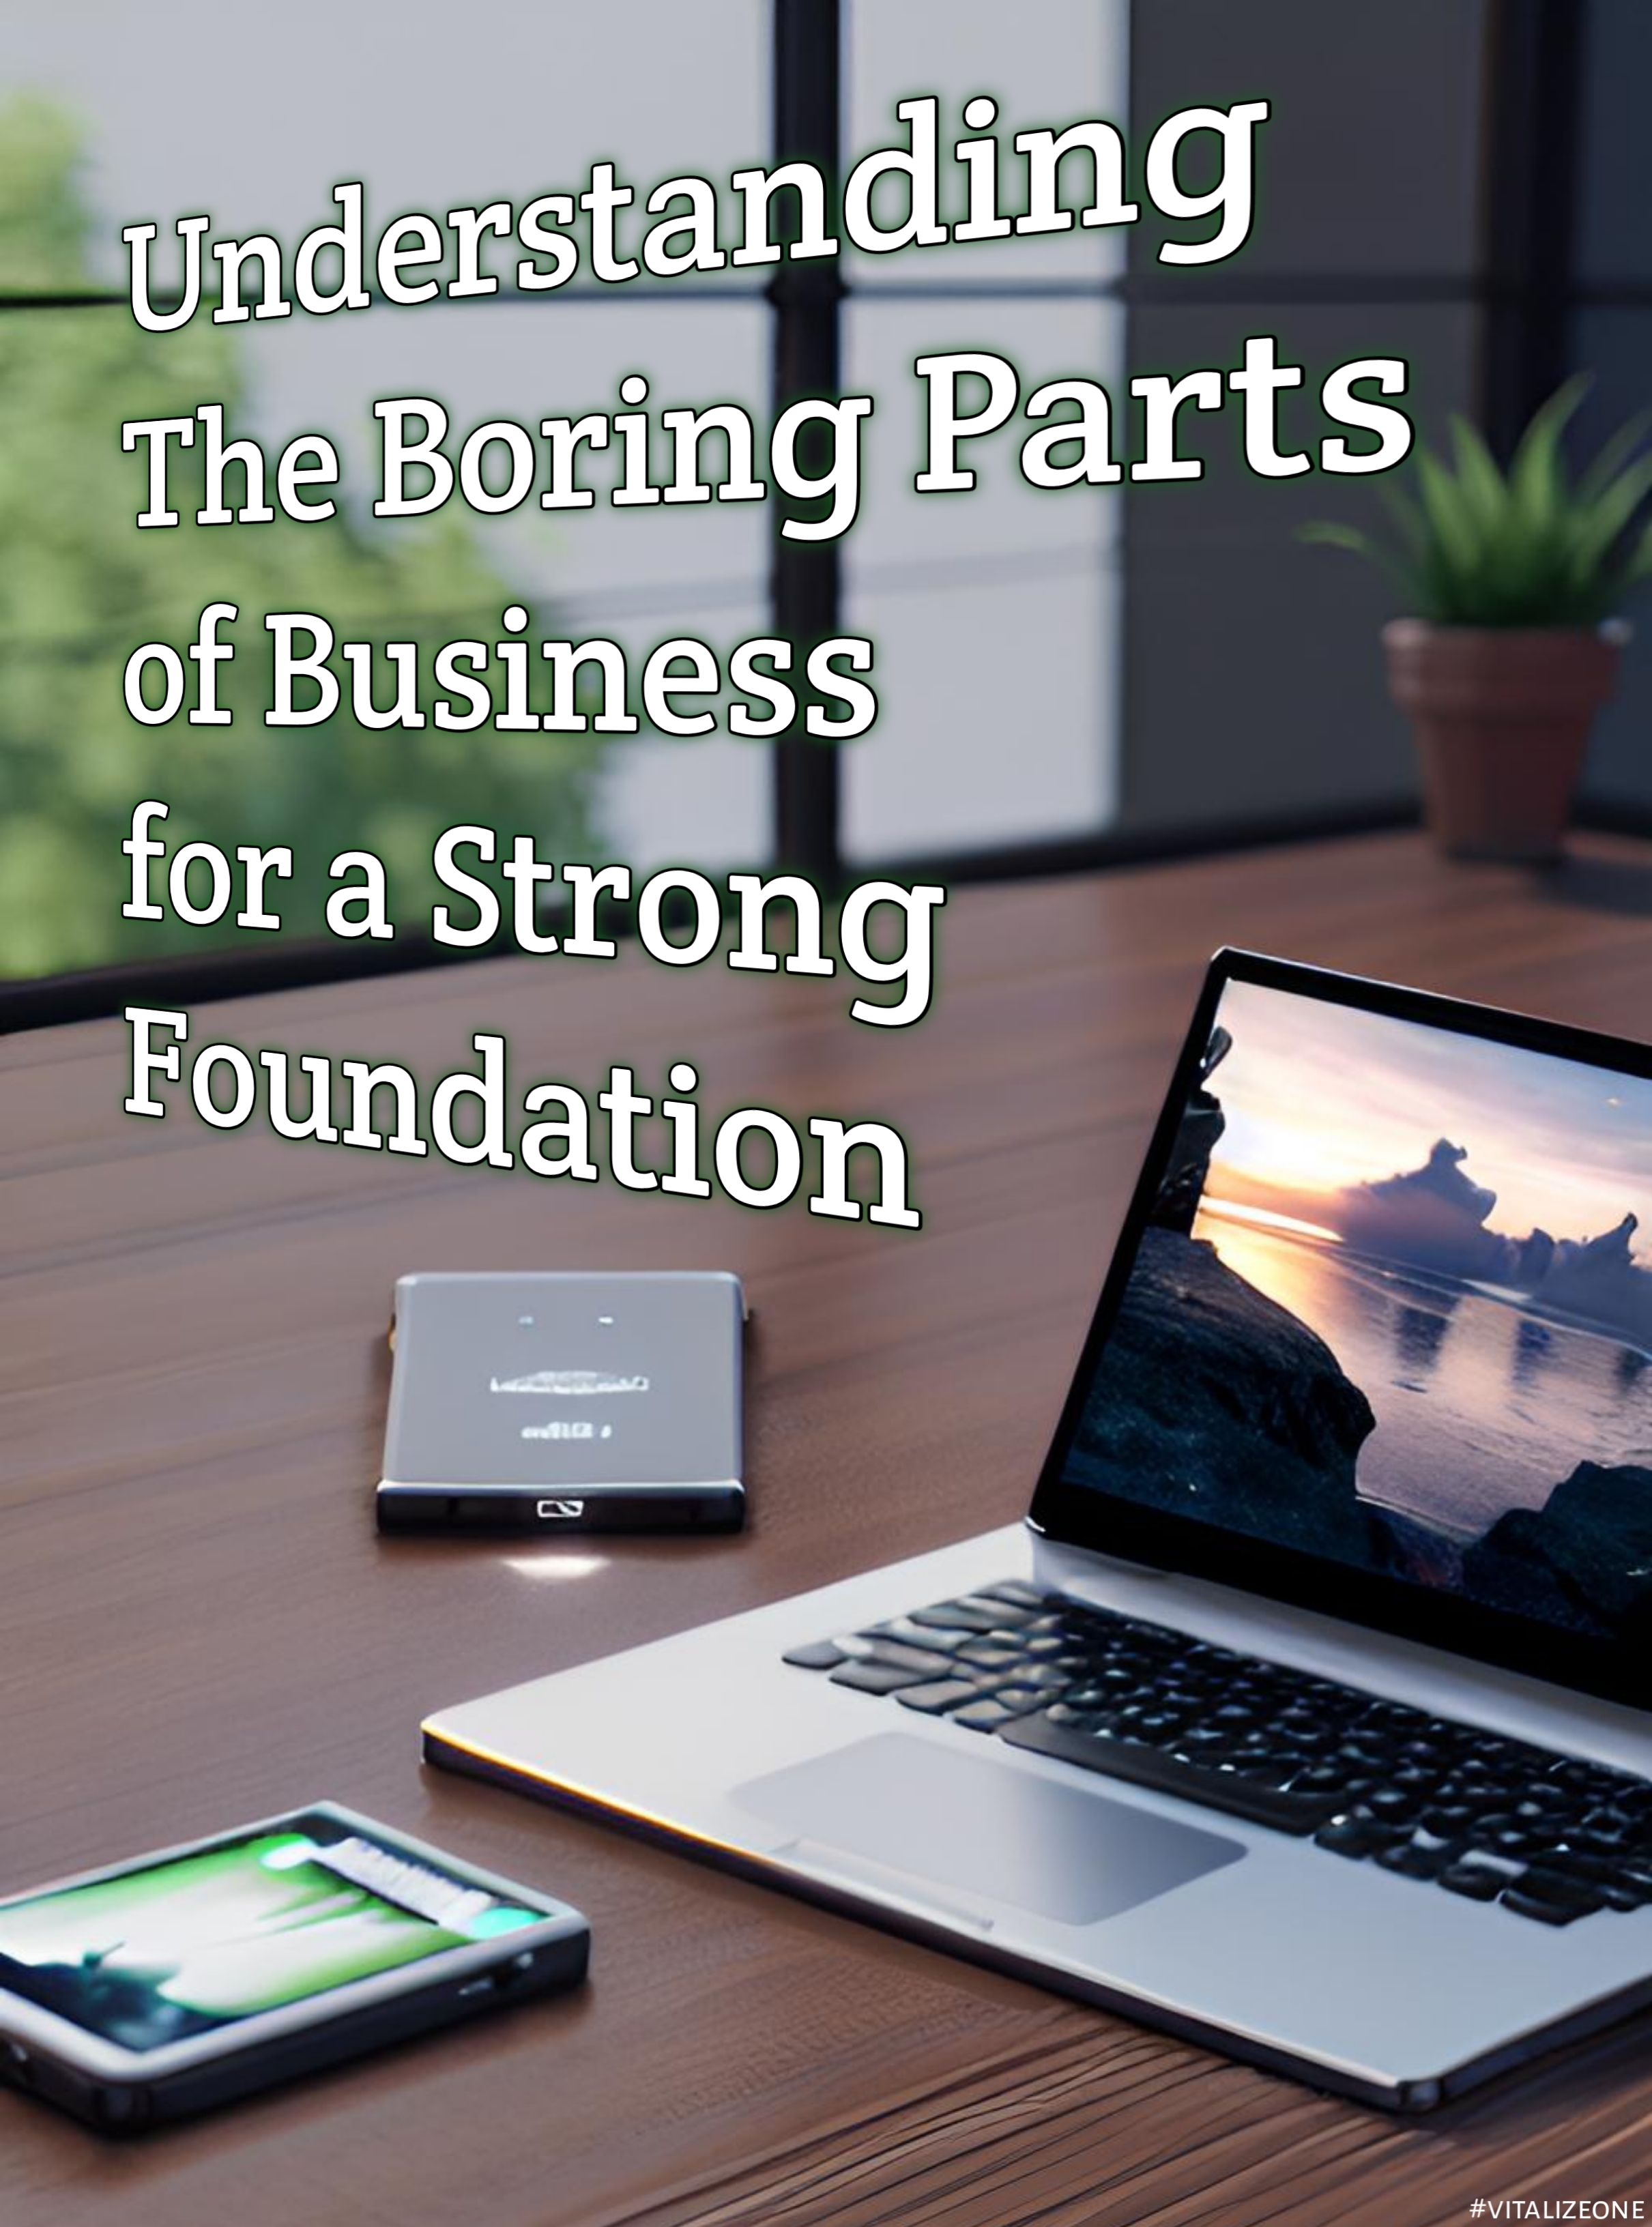 The Boring Parts of Launching a Business May Not Be Exciting, But They're Necessary for a Strong Foundation | VitalyTennant.com | #vitalizeone 2